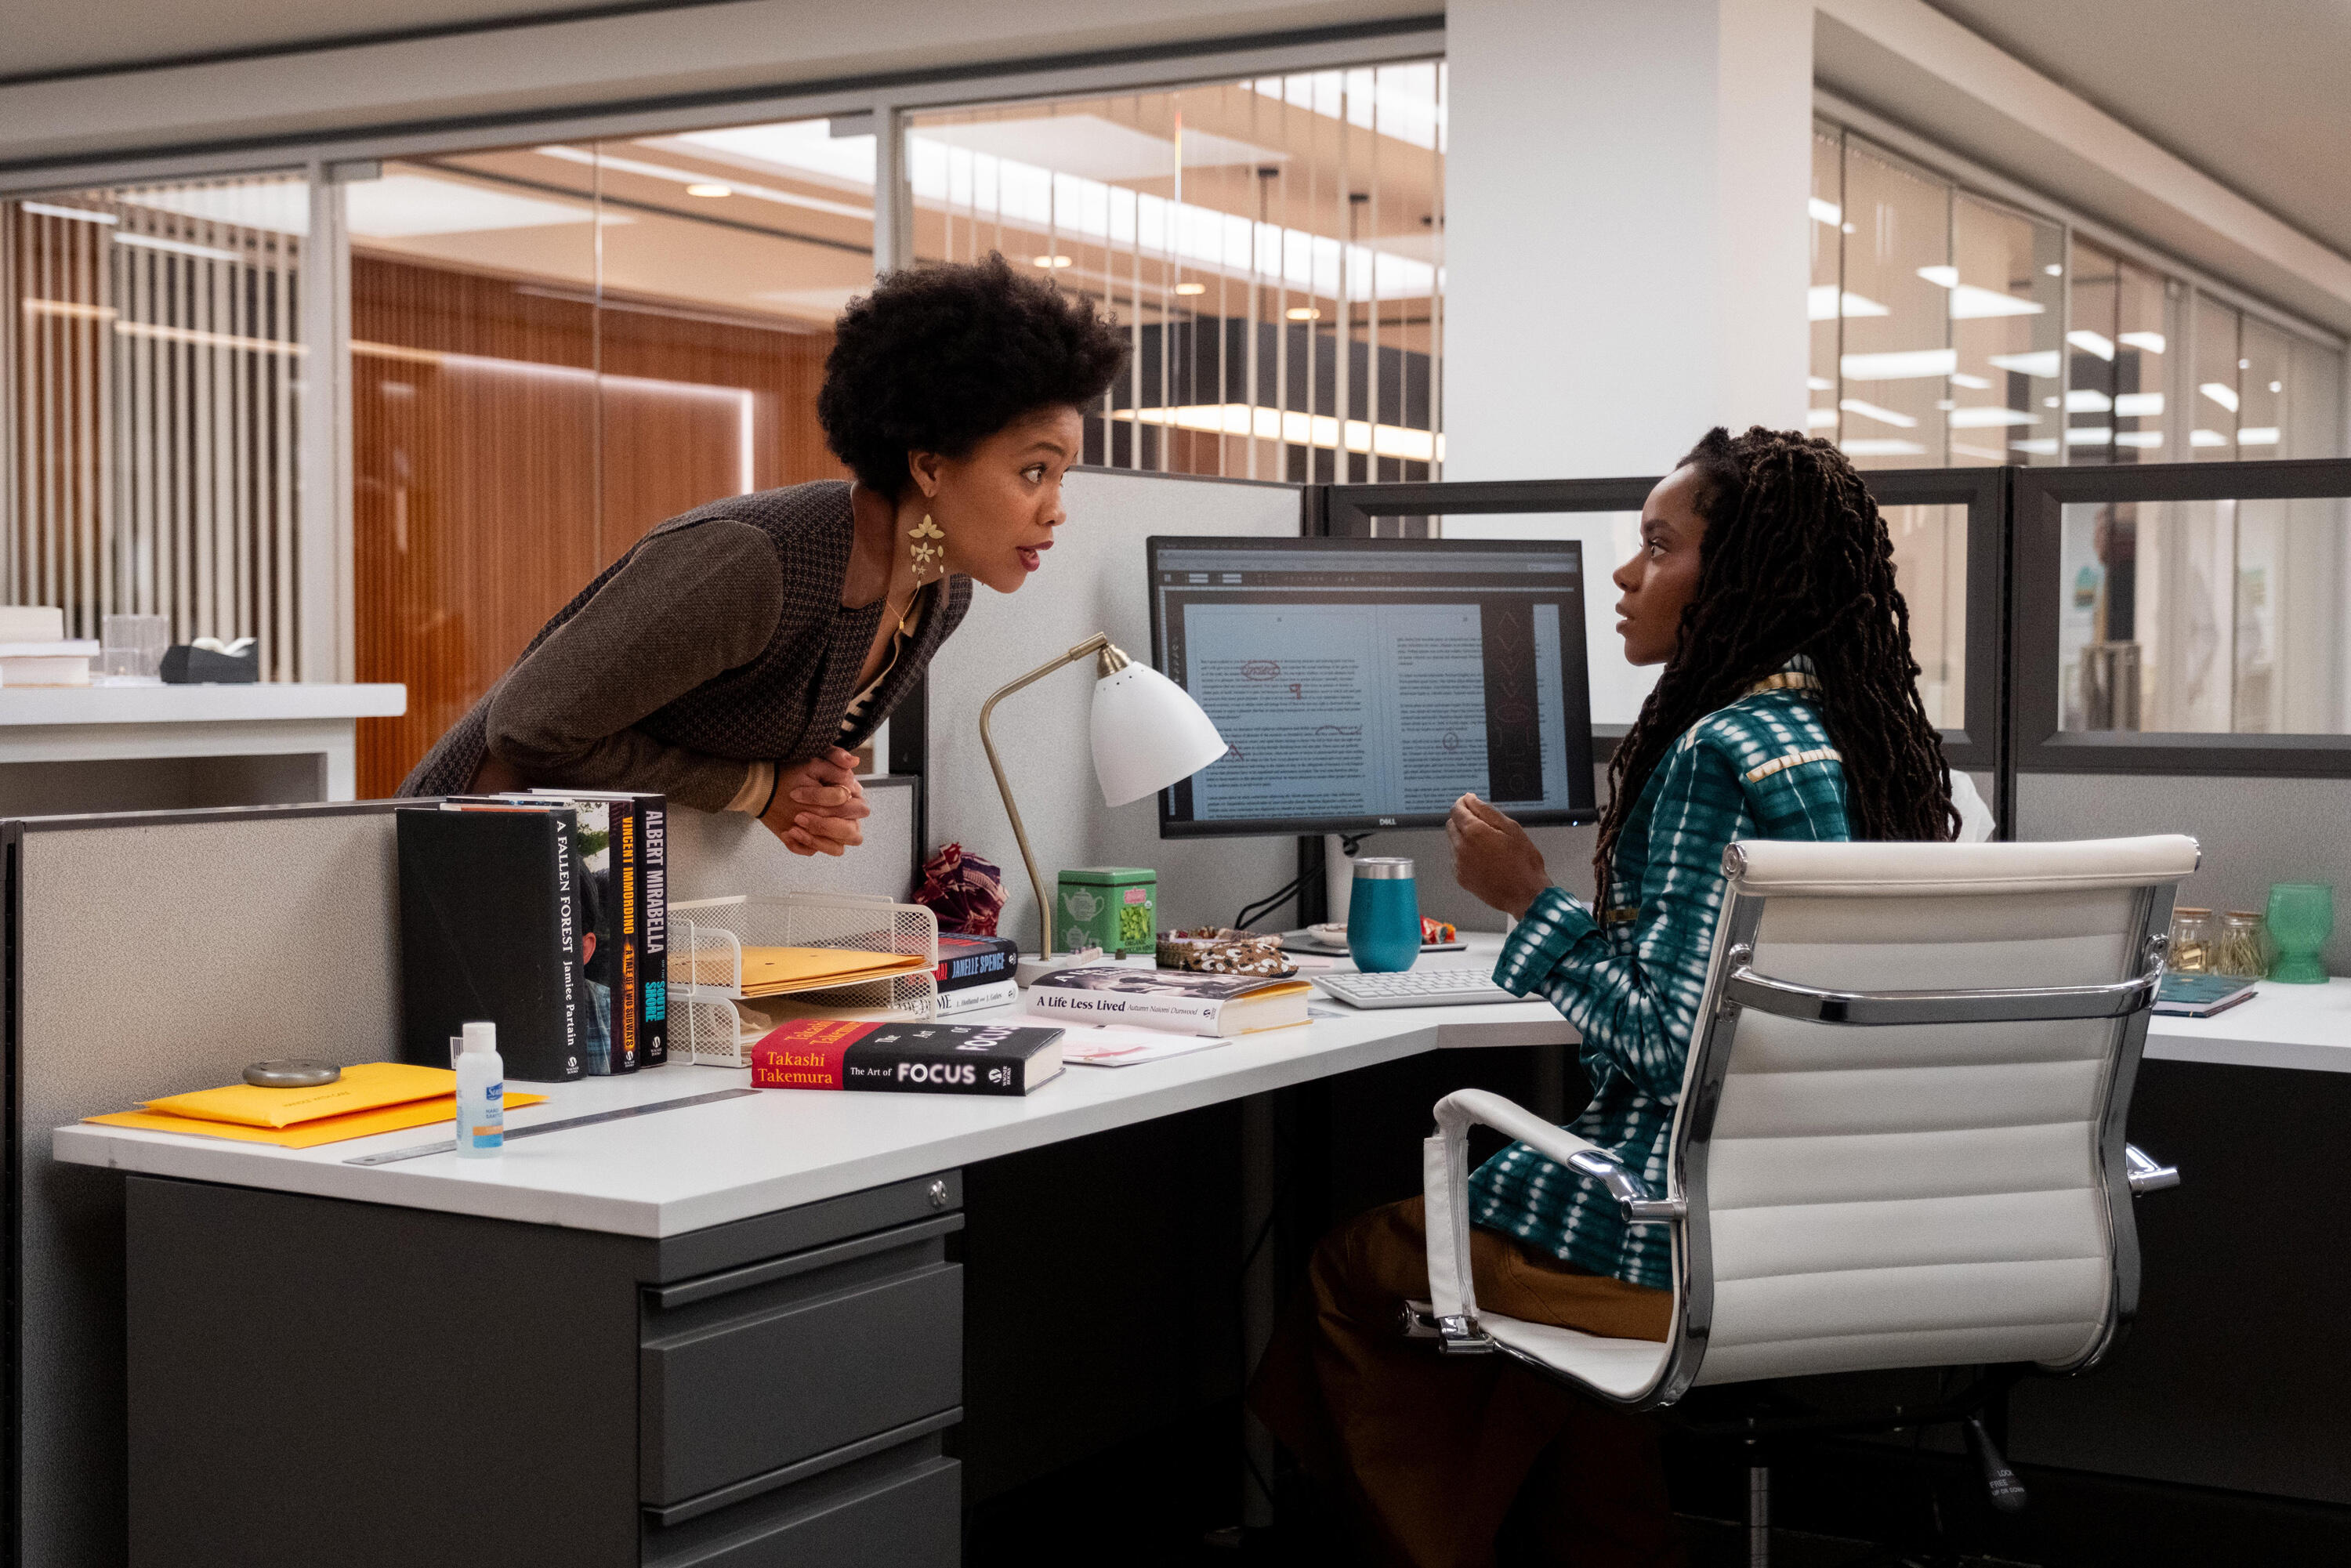 The Other Black Girl -- “What About Your Friends” - Episode 104 -- Nella meets Diana Gordon, a famous author and her hero, and Nella invites Hazel over to meet her friends. Nella (Sinclair Daniel) and Hazel (Ashleigh Murray), shown. (Photo by: Wilford Harwood/Hulu)